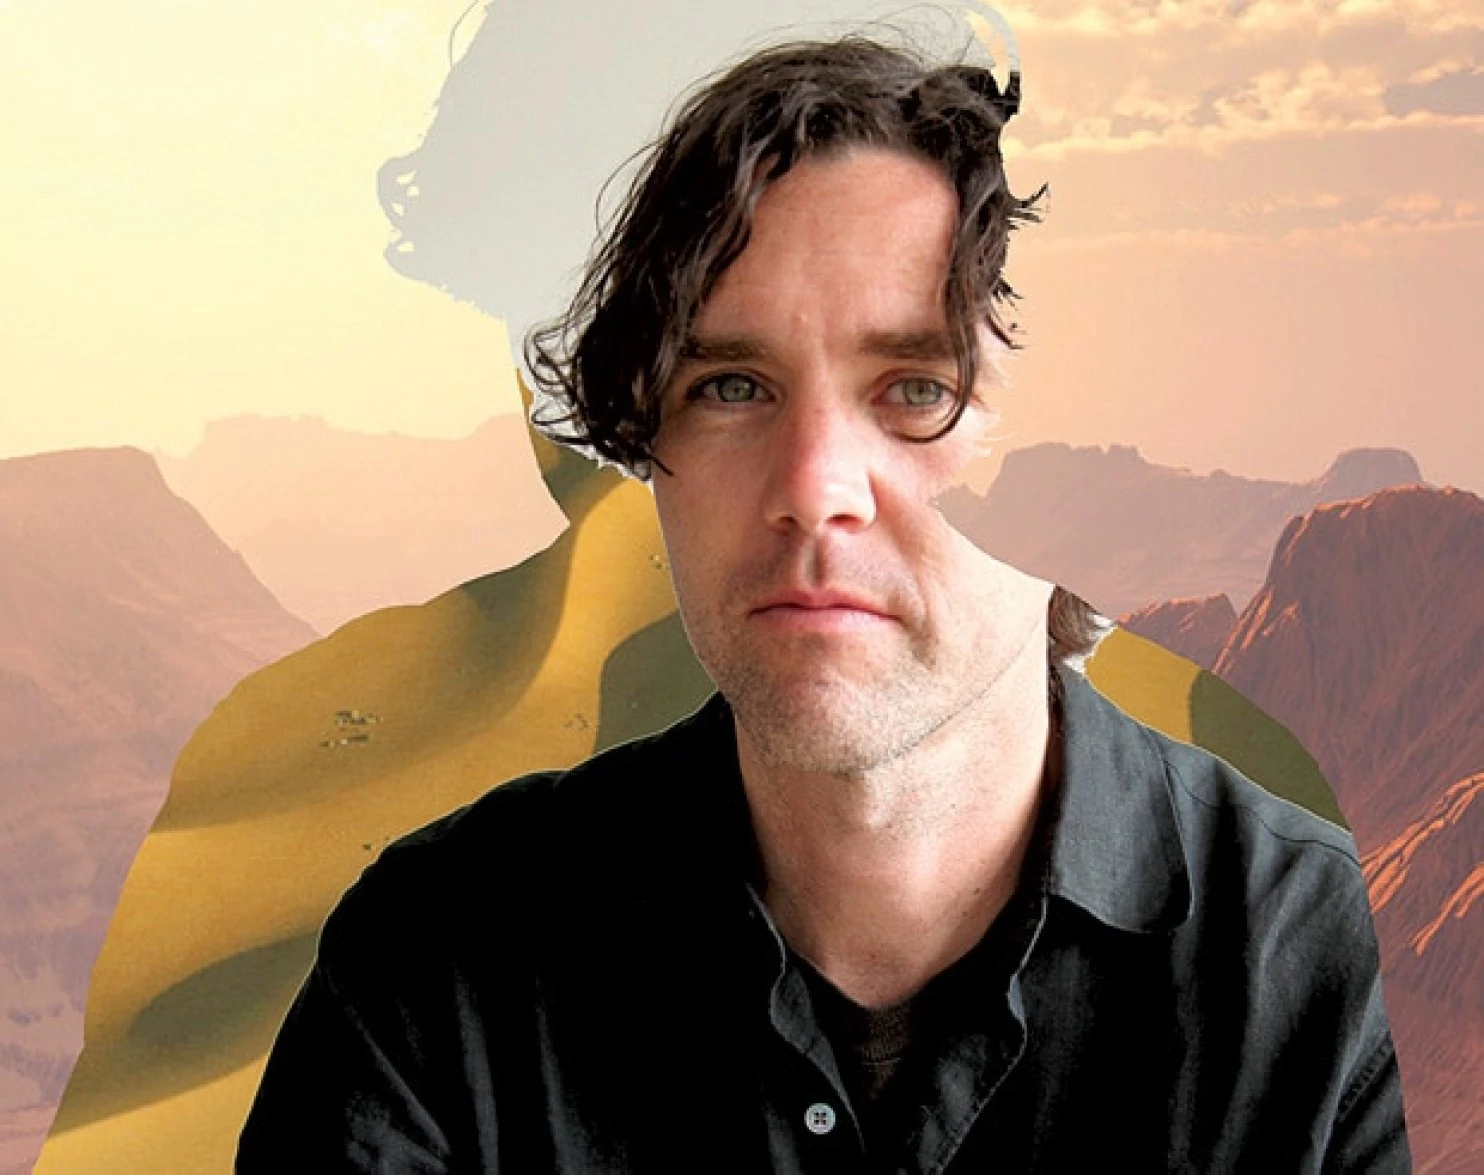 Cass McCombs Deep thoughts from Cass McCombs ahead of Sunday39s Black